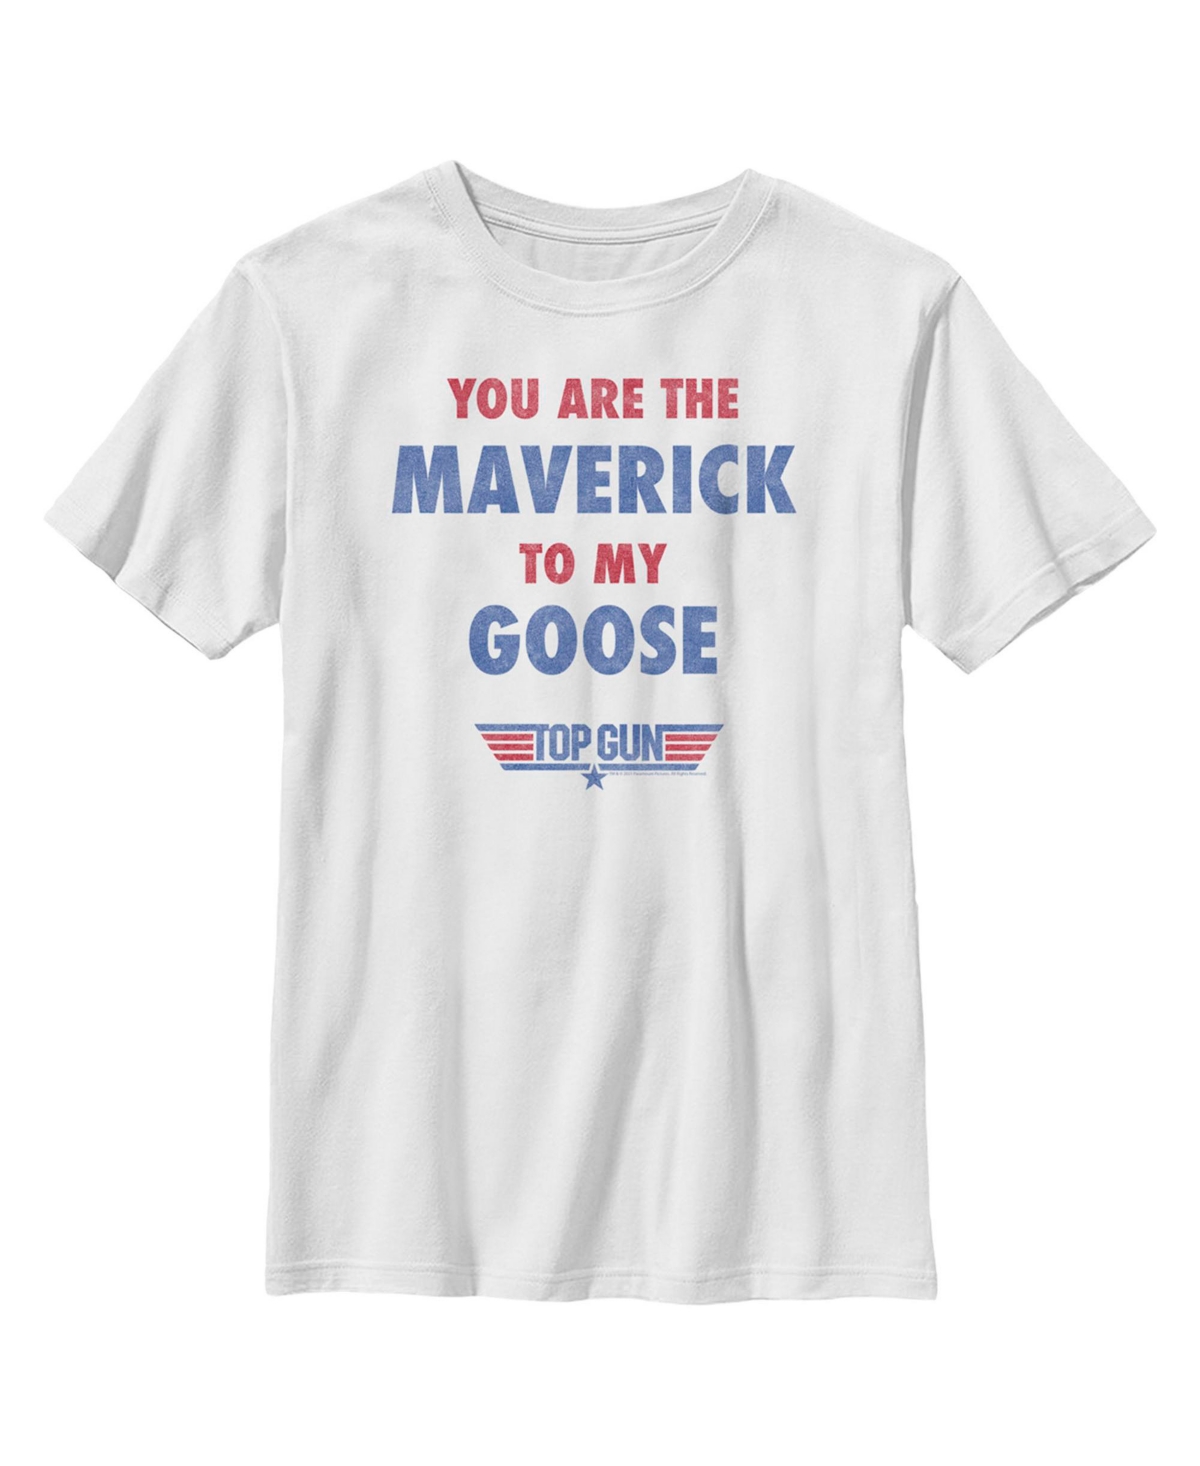 Paramount Pictures Kids' Boy's Top Gun You Are The Maverick To My Goose Child T-shirt In White